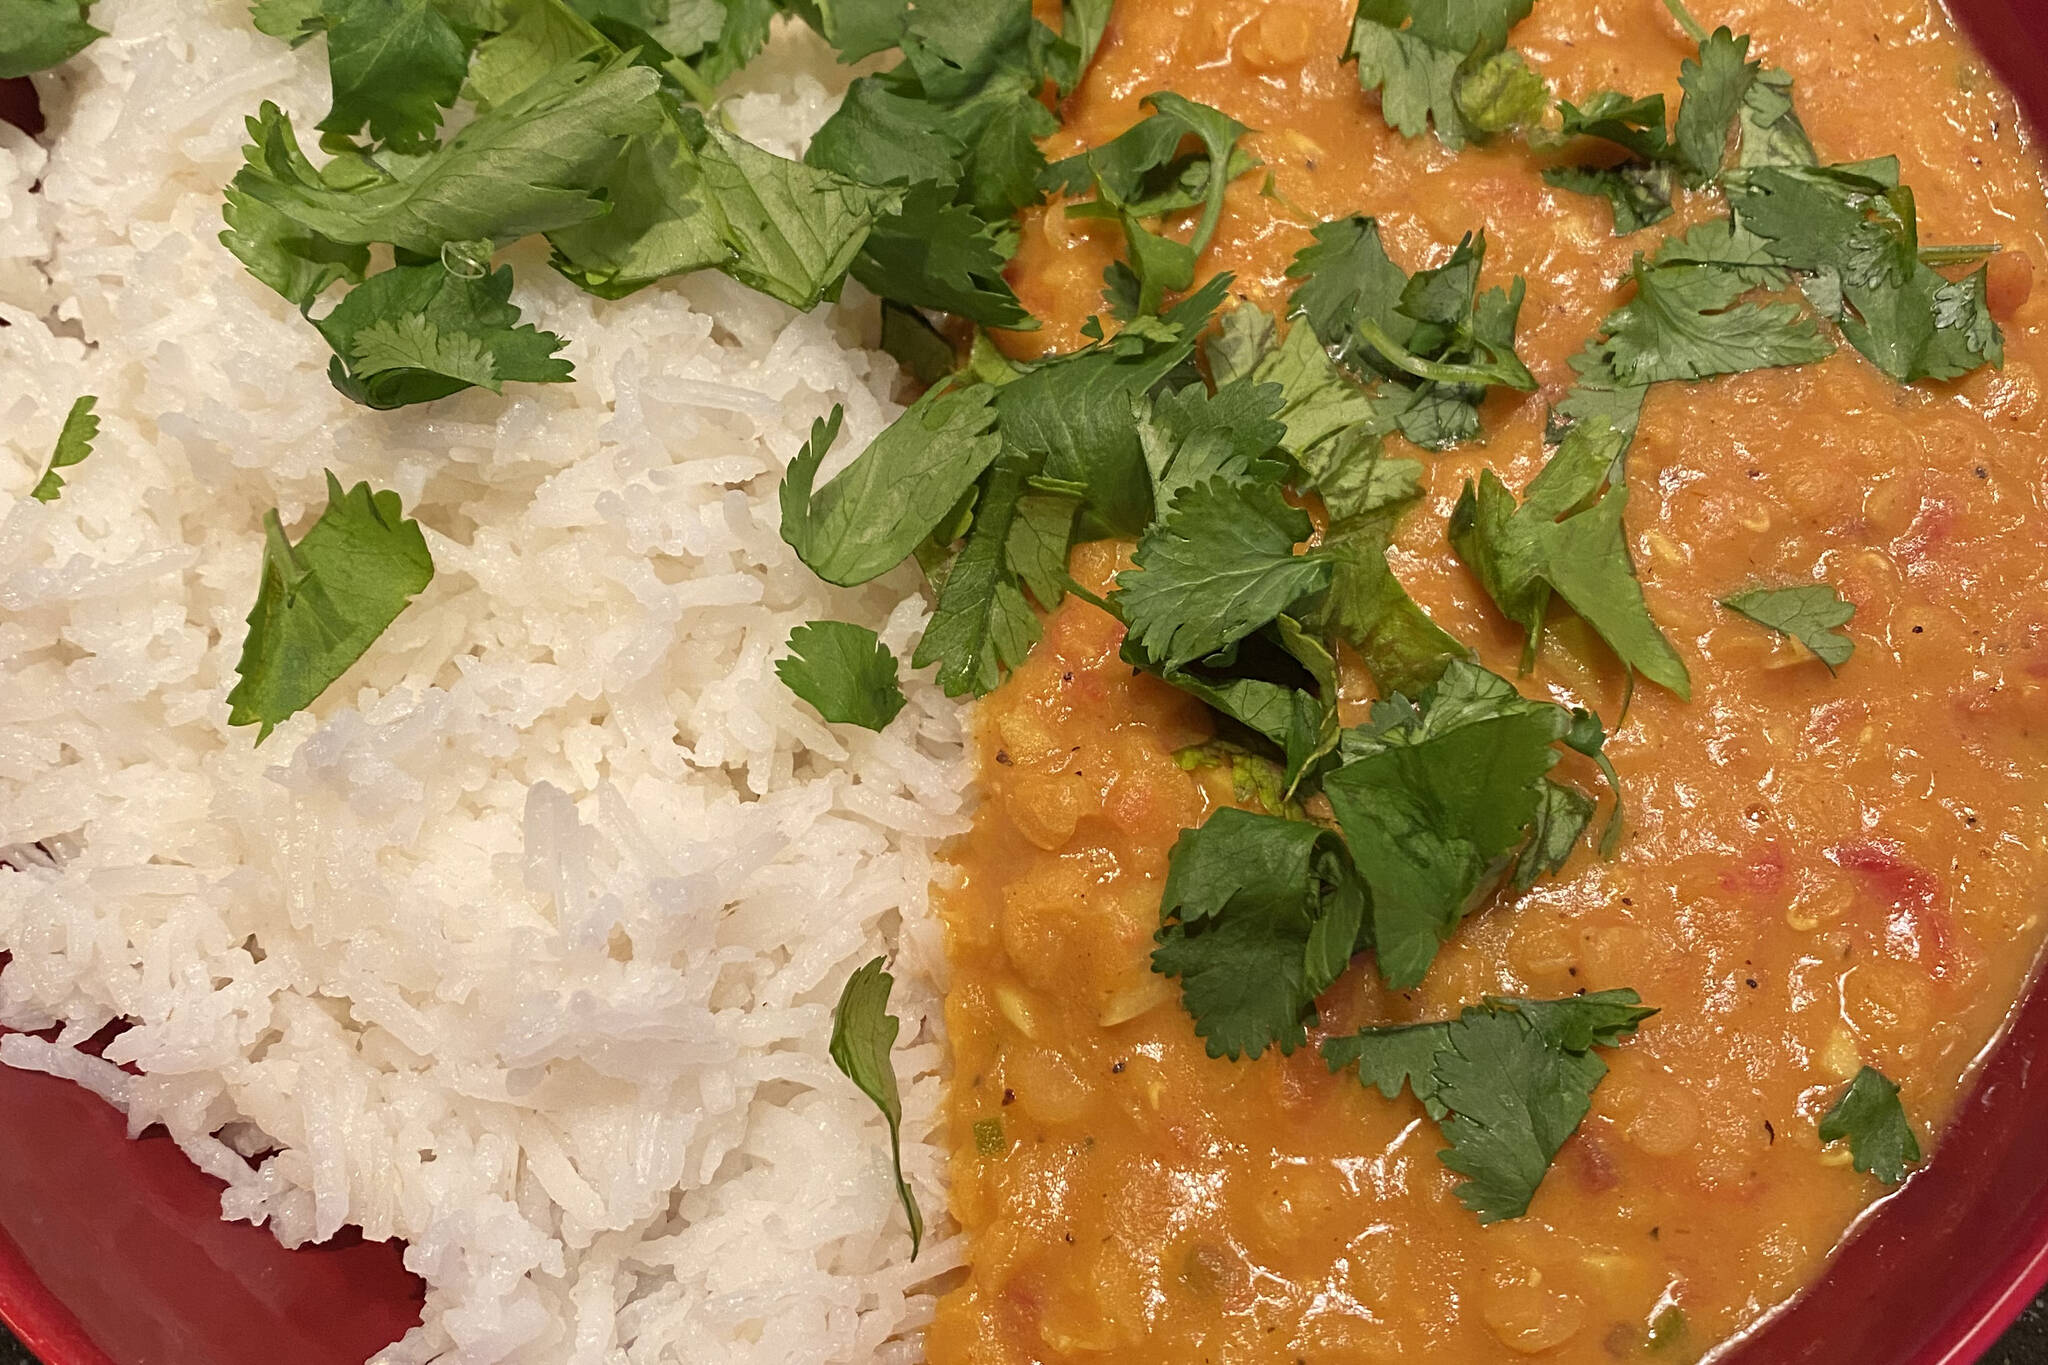 Curried lentils are served with basmati rice and garnished with cilantro. (Photo by Tressa Dale/Peninsula Clarion)